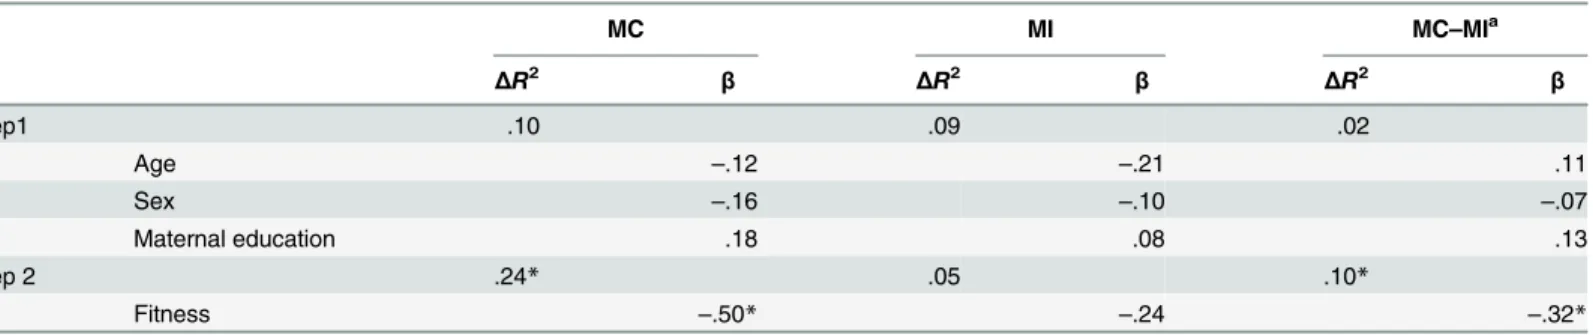 Table 3. Summary of regression analyses for variables predicting Ne/ERN amplitude.